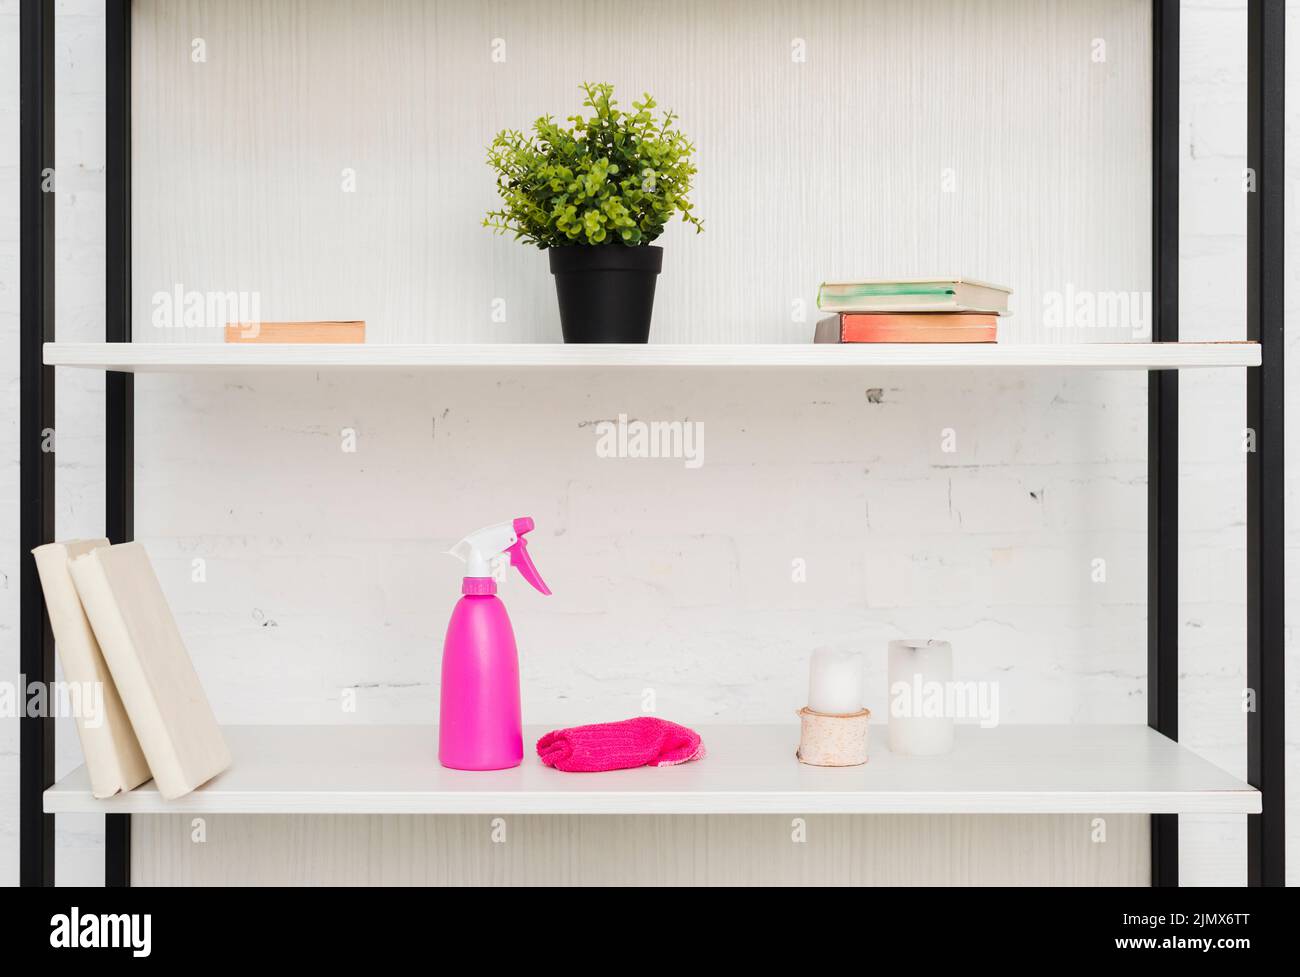 Front view shelves with plants Stock Photo